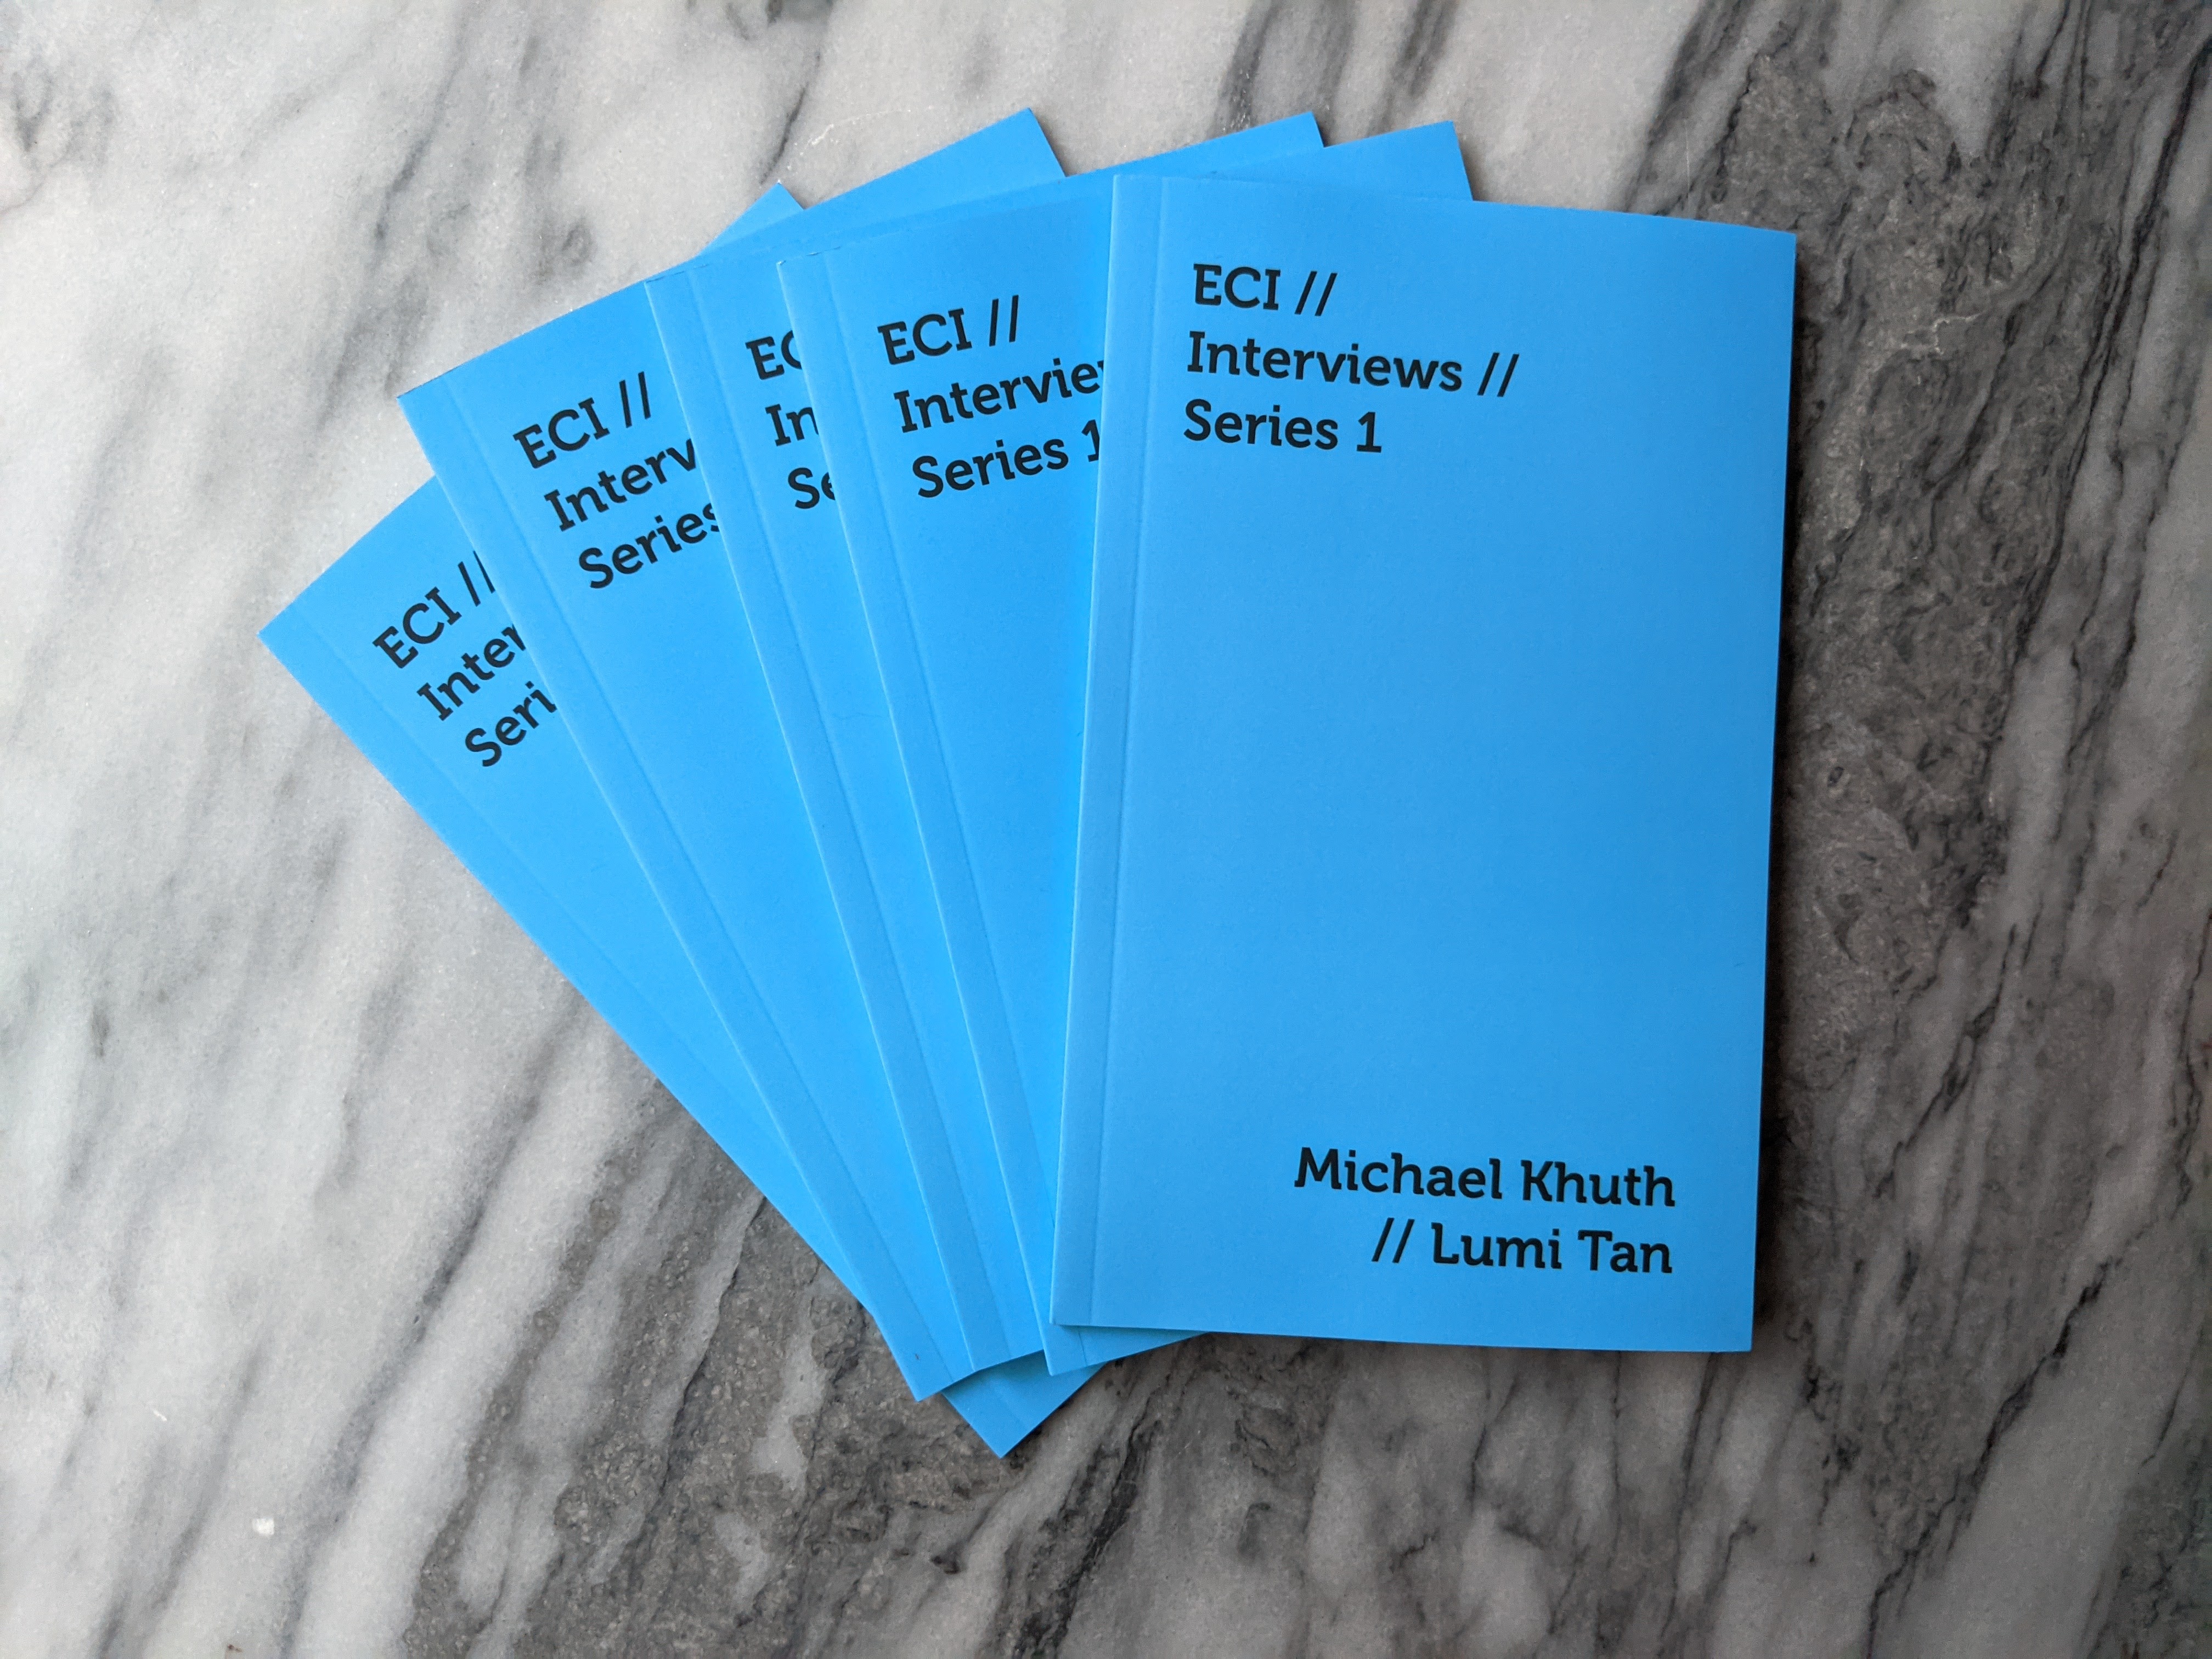 Photograph of a stack of booklets by Michael Khuth and Lumi Tan